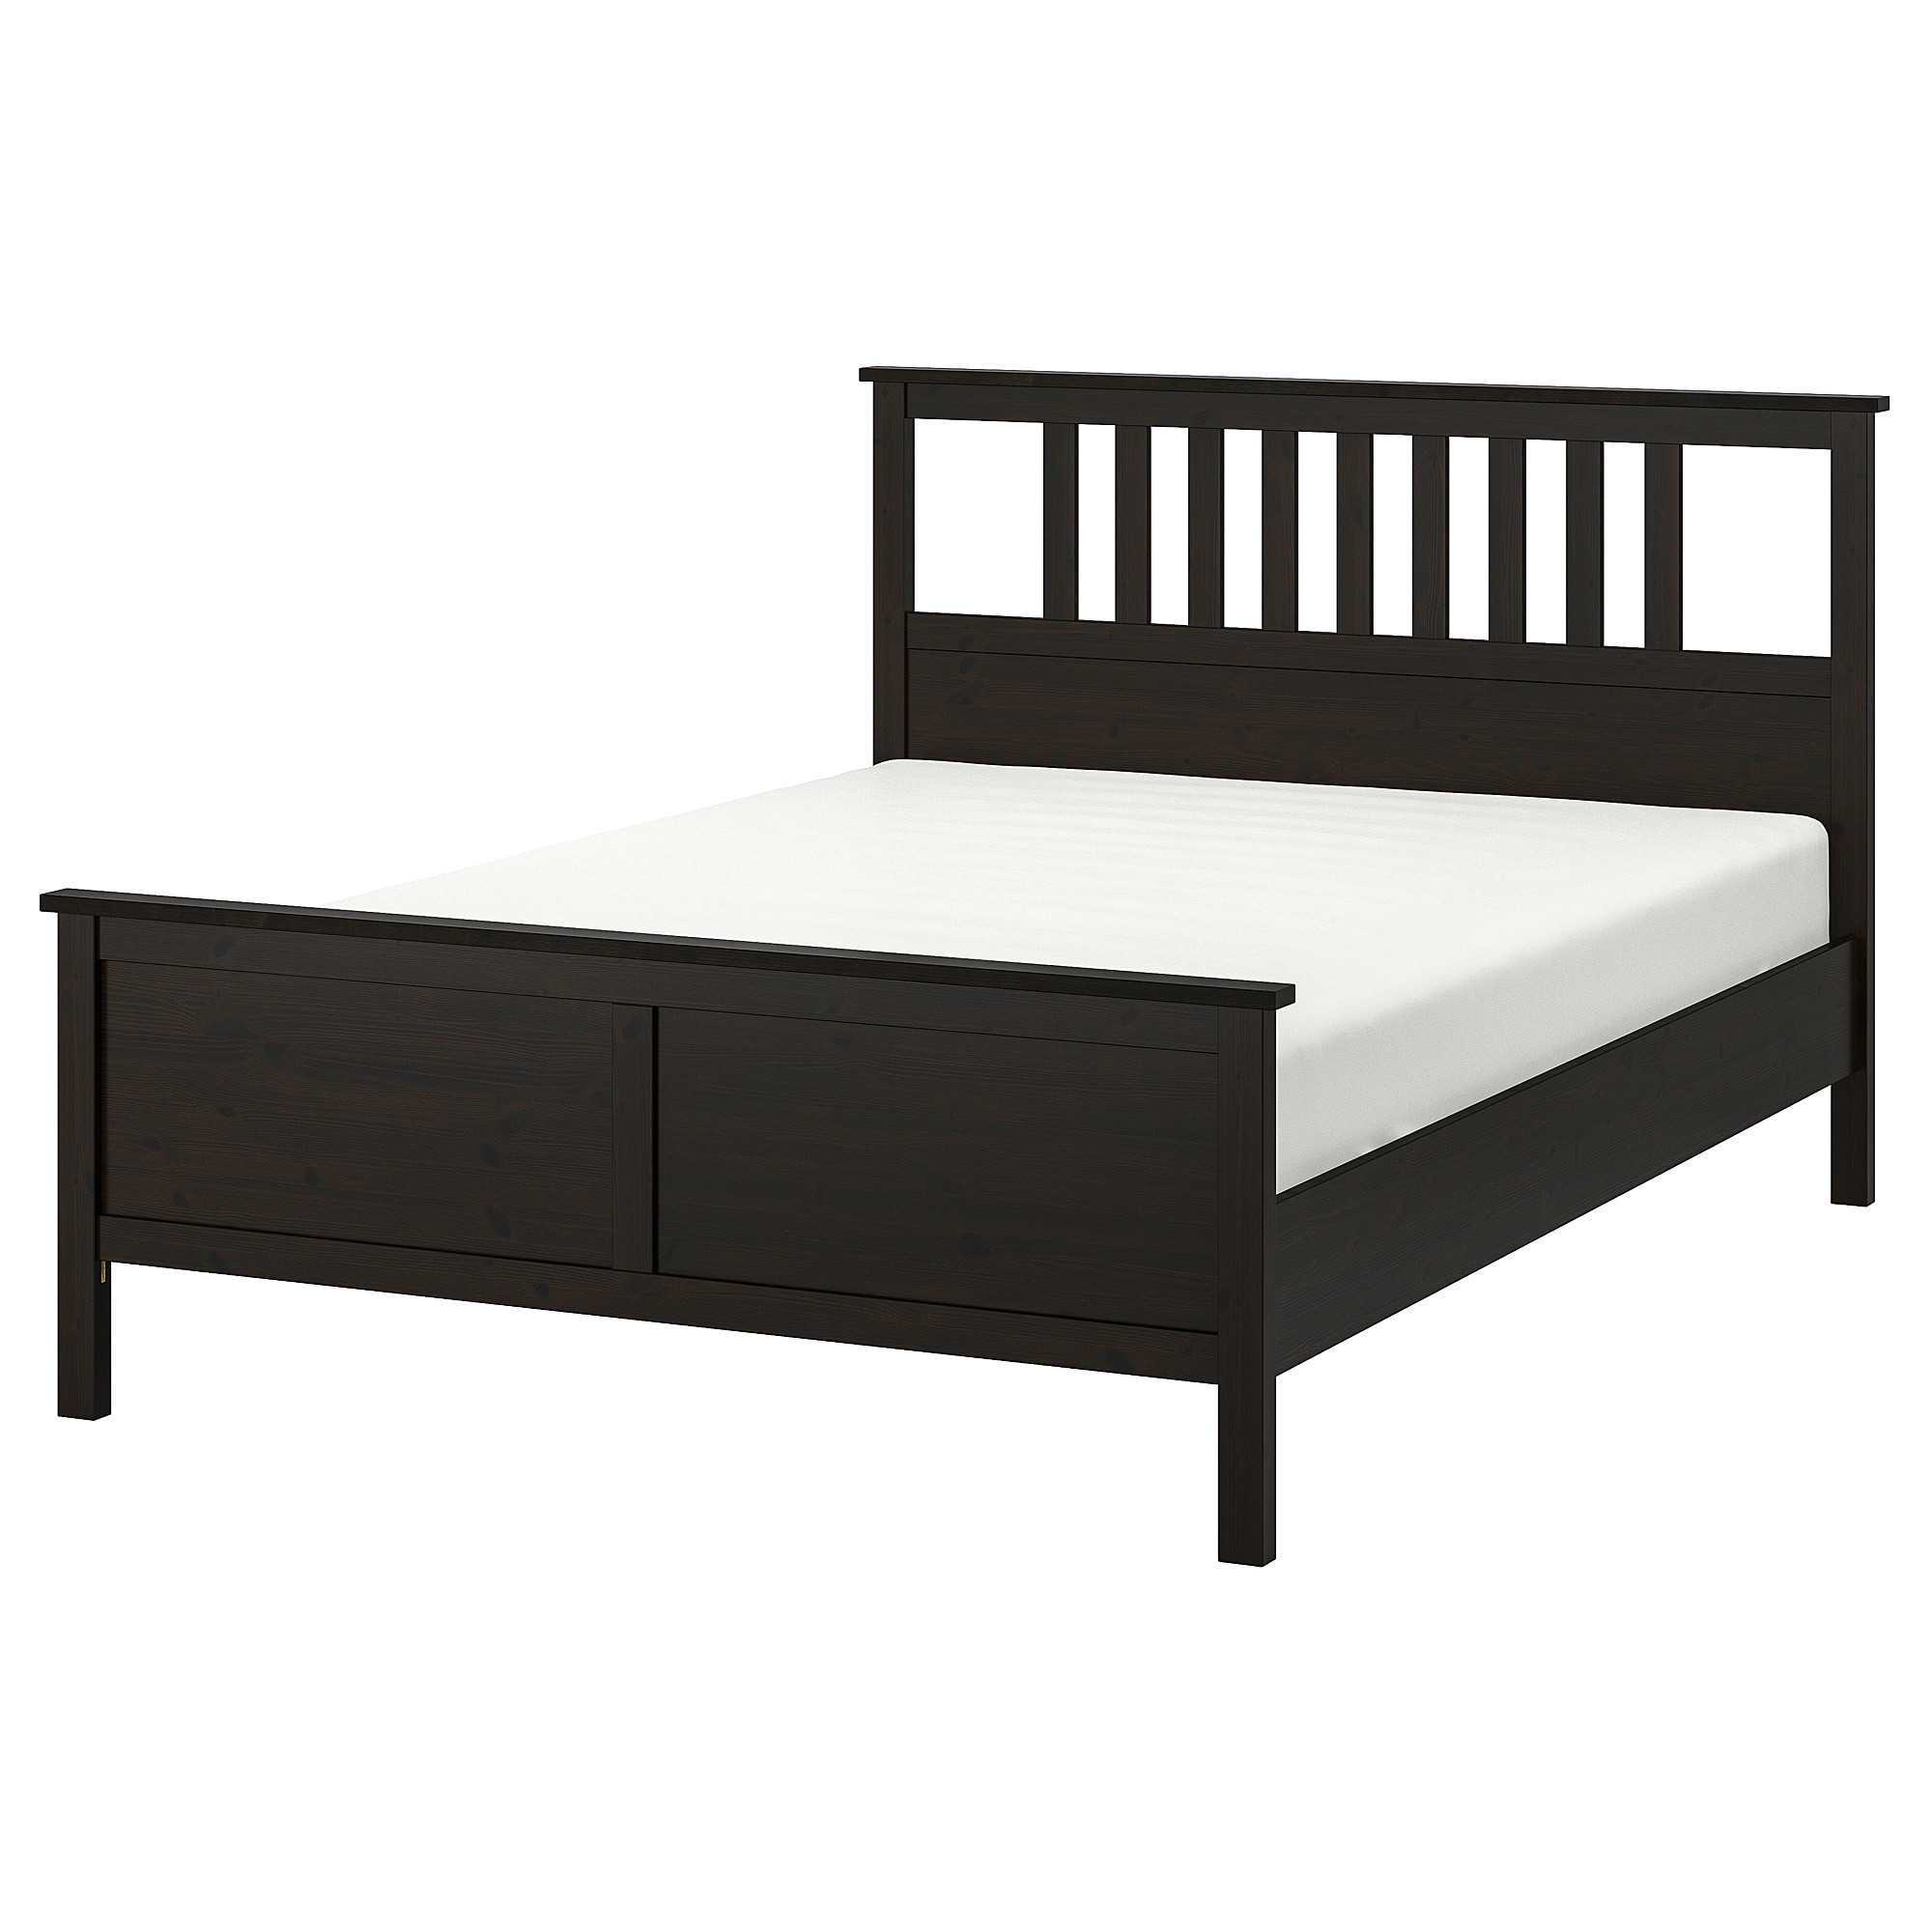 ikea hemnes bed frame made of solid wood which is a hardwearing and warm natural